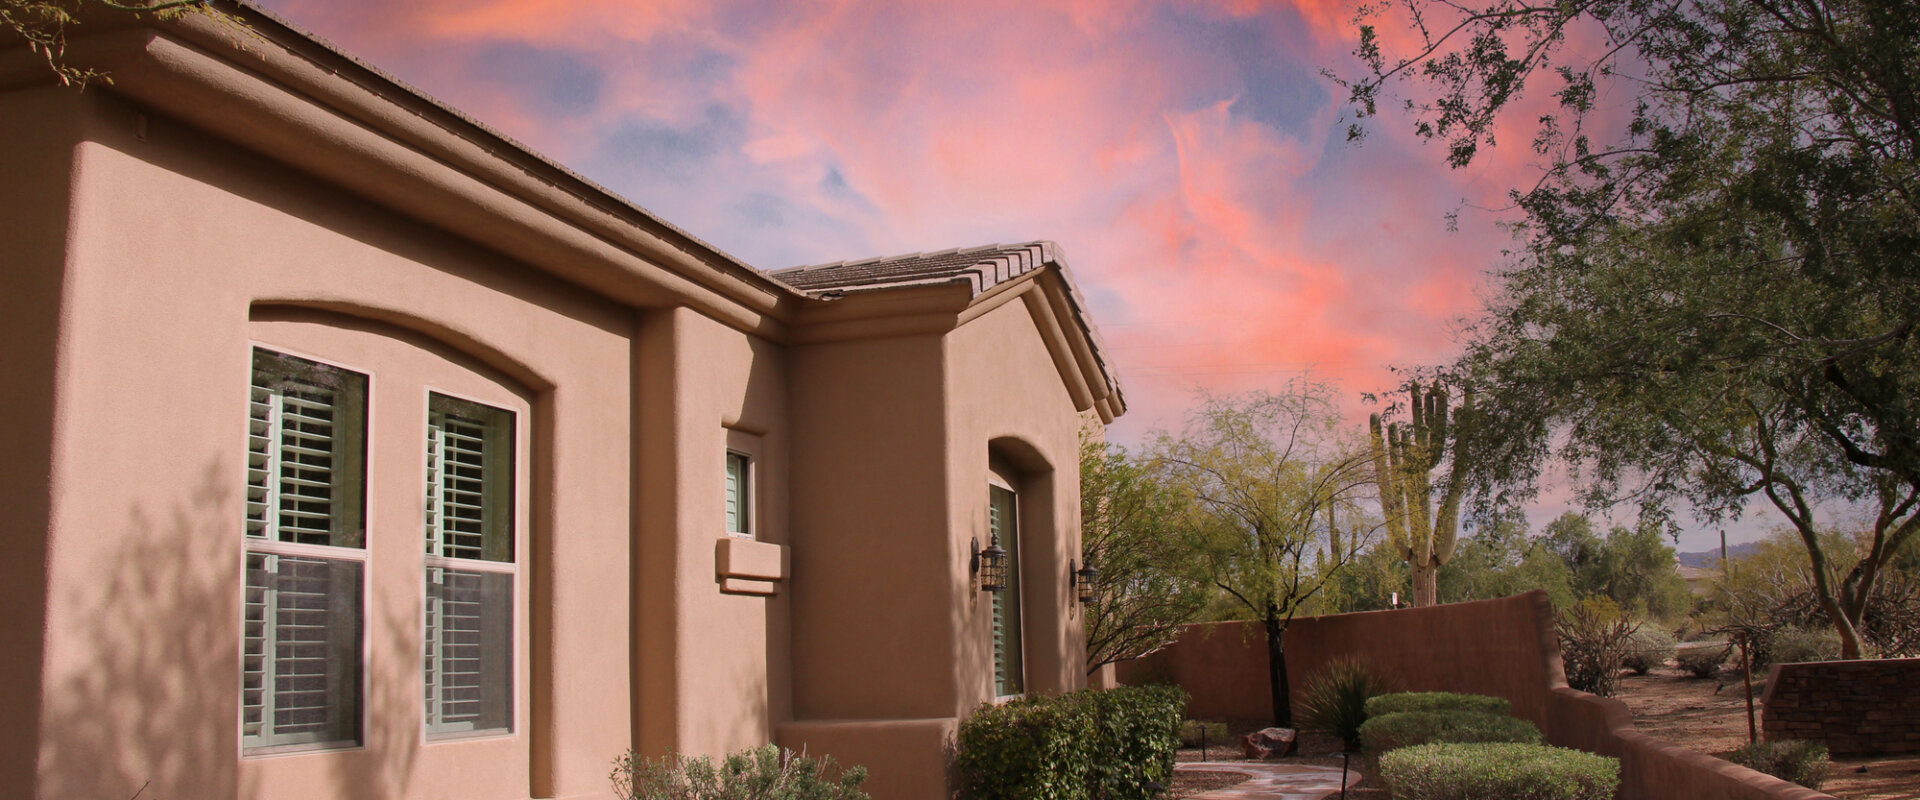 Sell Your House Fast In Phoenix, AZ